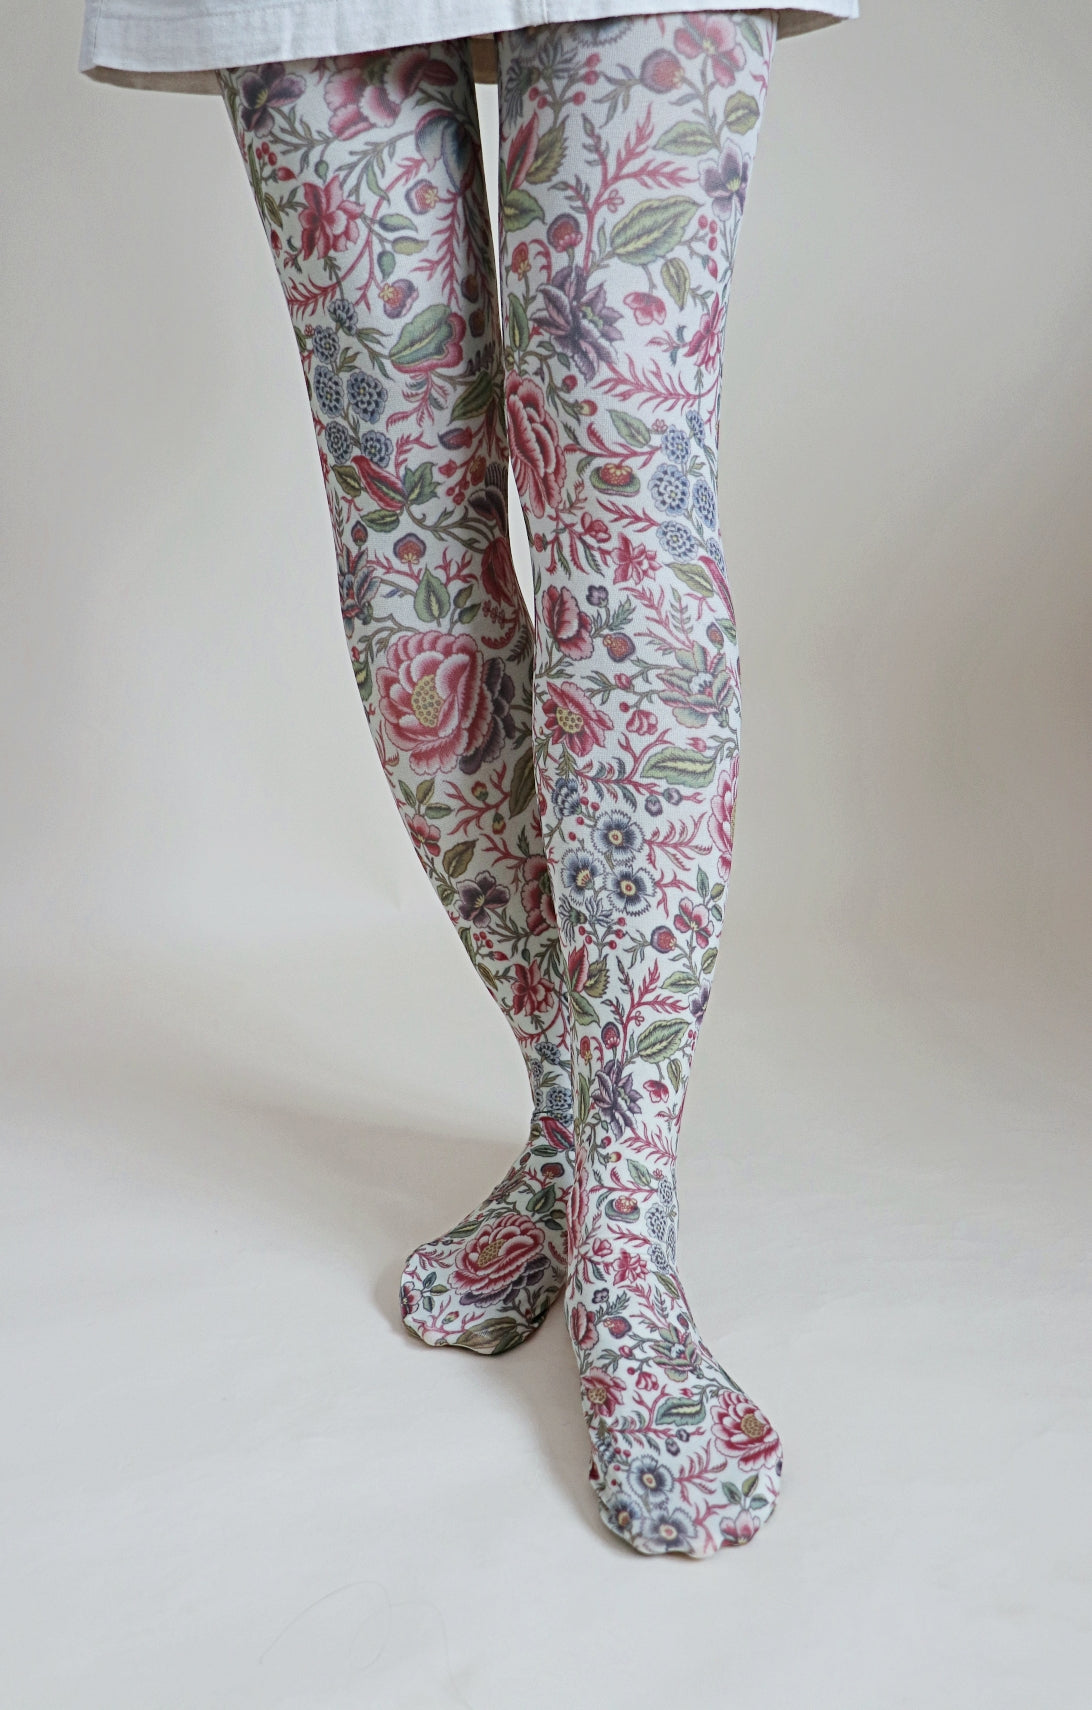 Overall whitish fabric with red floral pattern throughout the tights